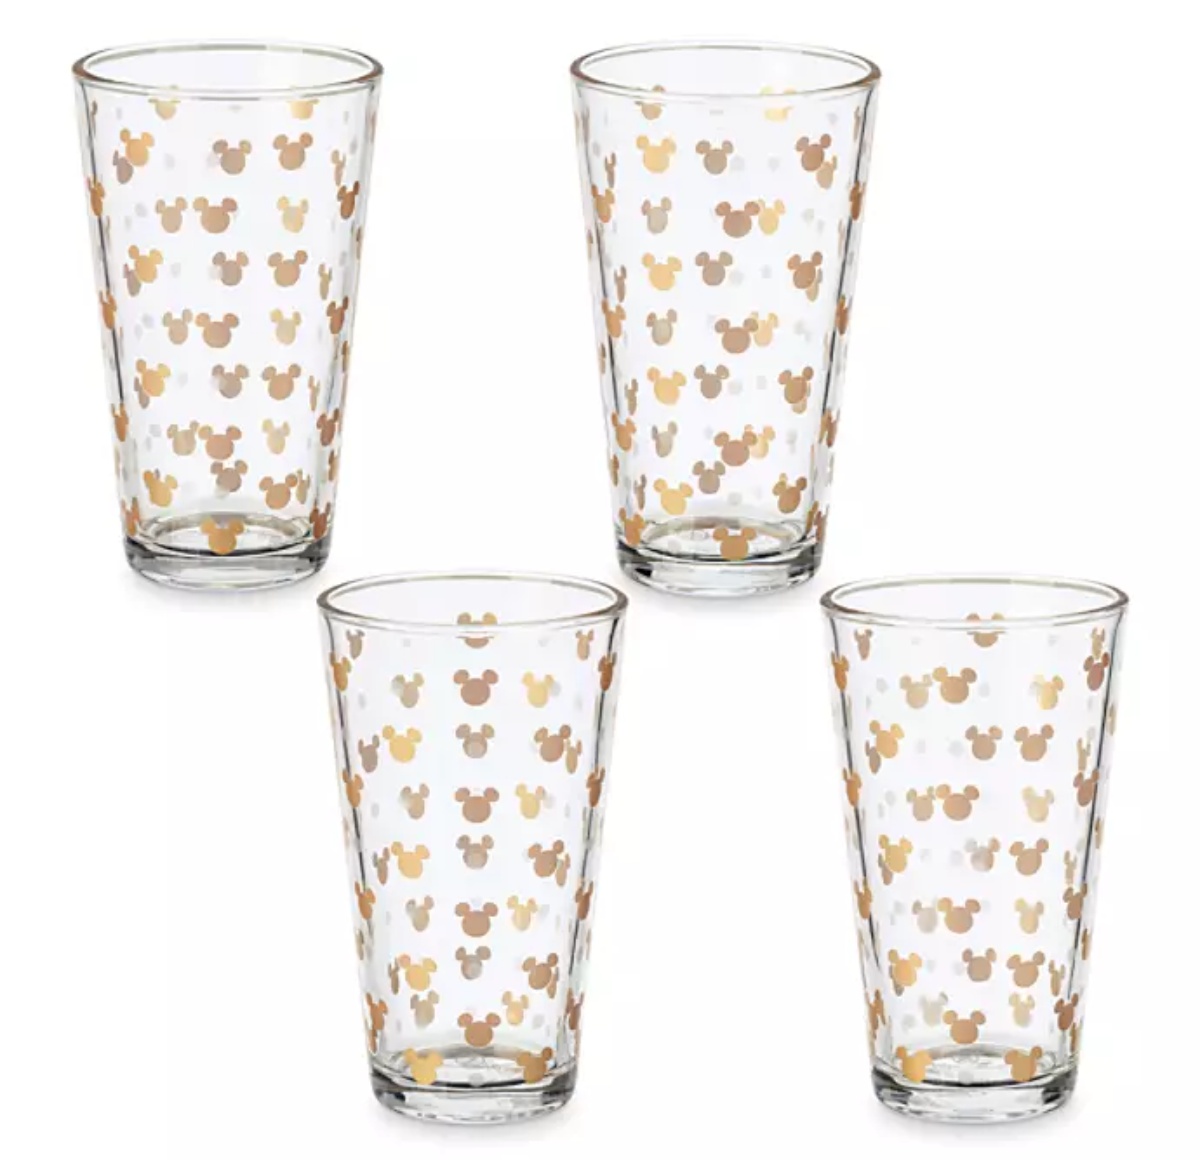 4 Disney glasses with gold Mickeys